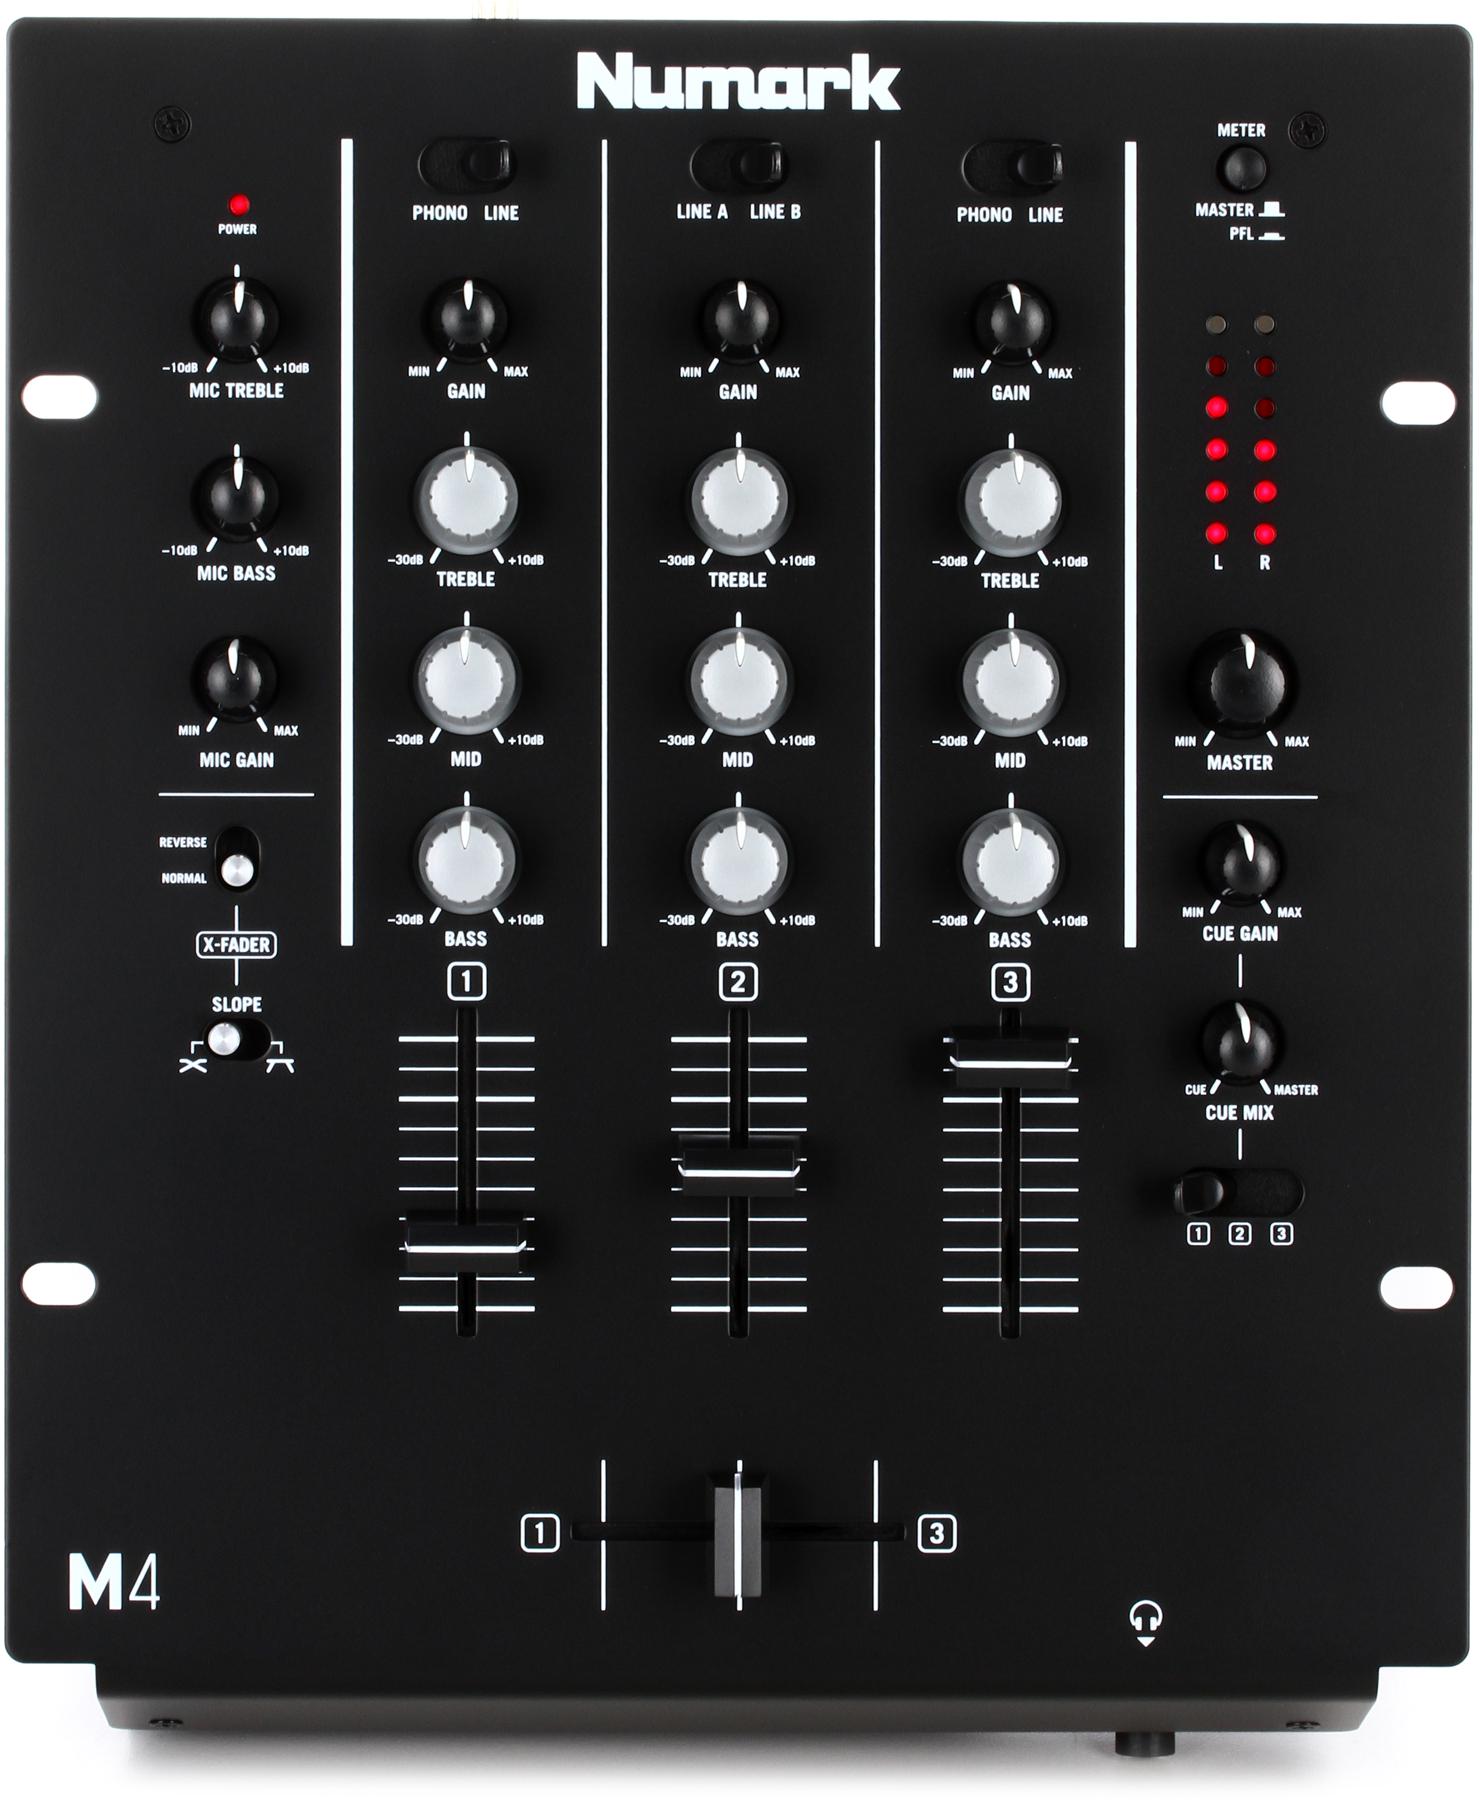 behringer xenyx x1204usb is getting no audio out